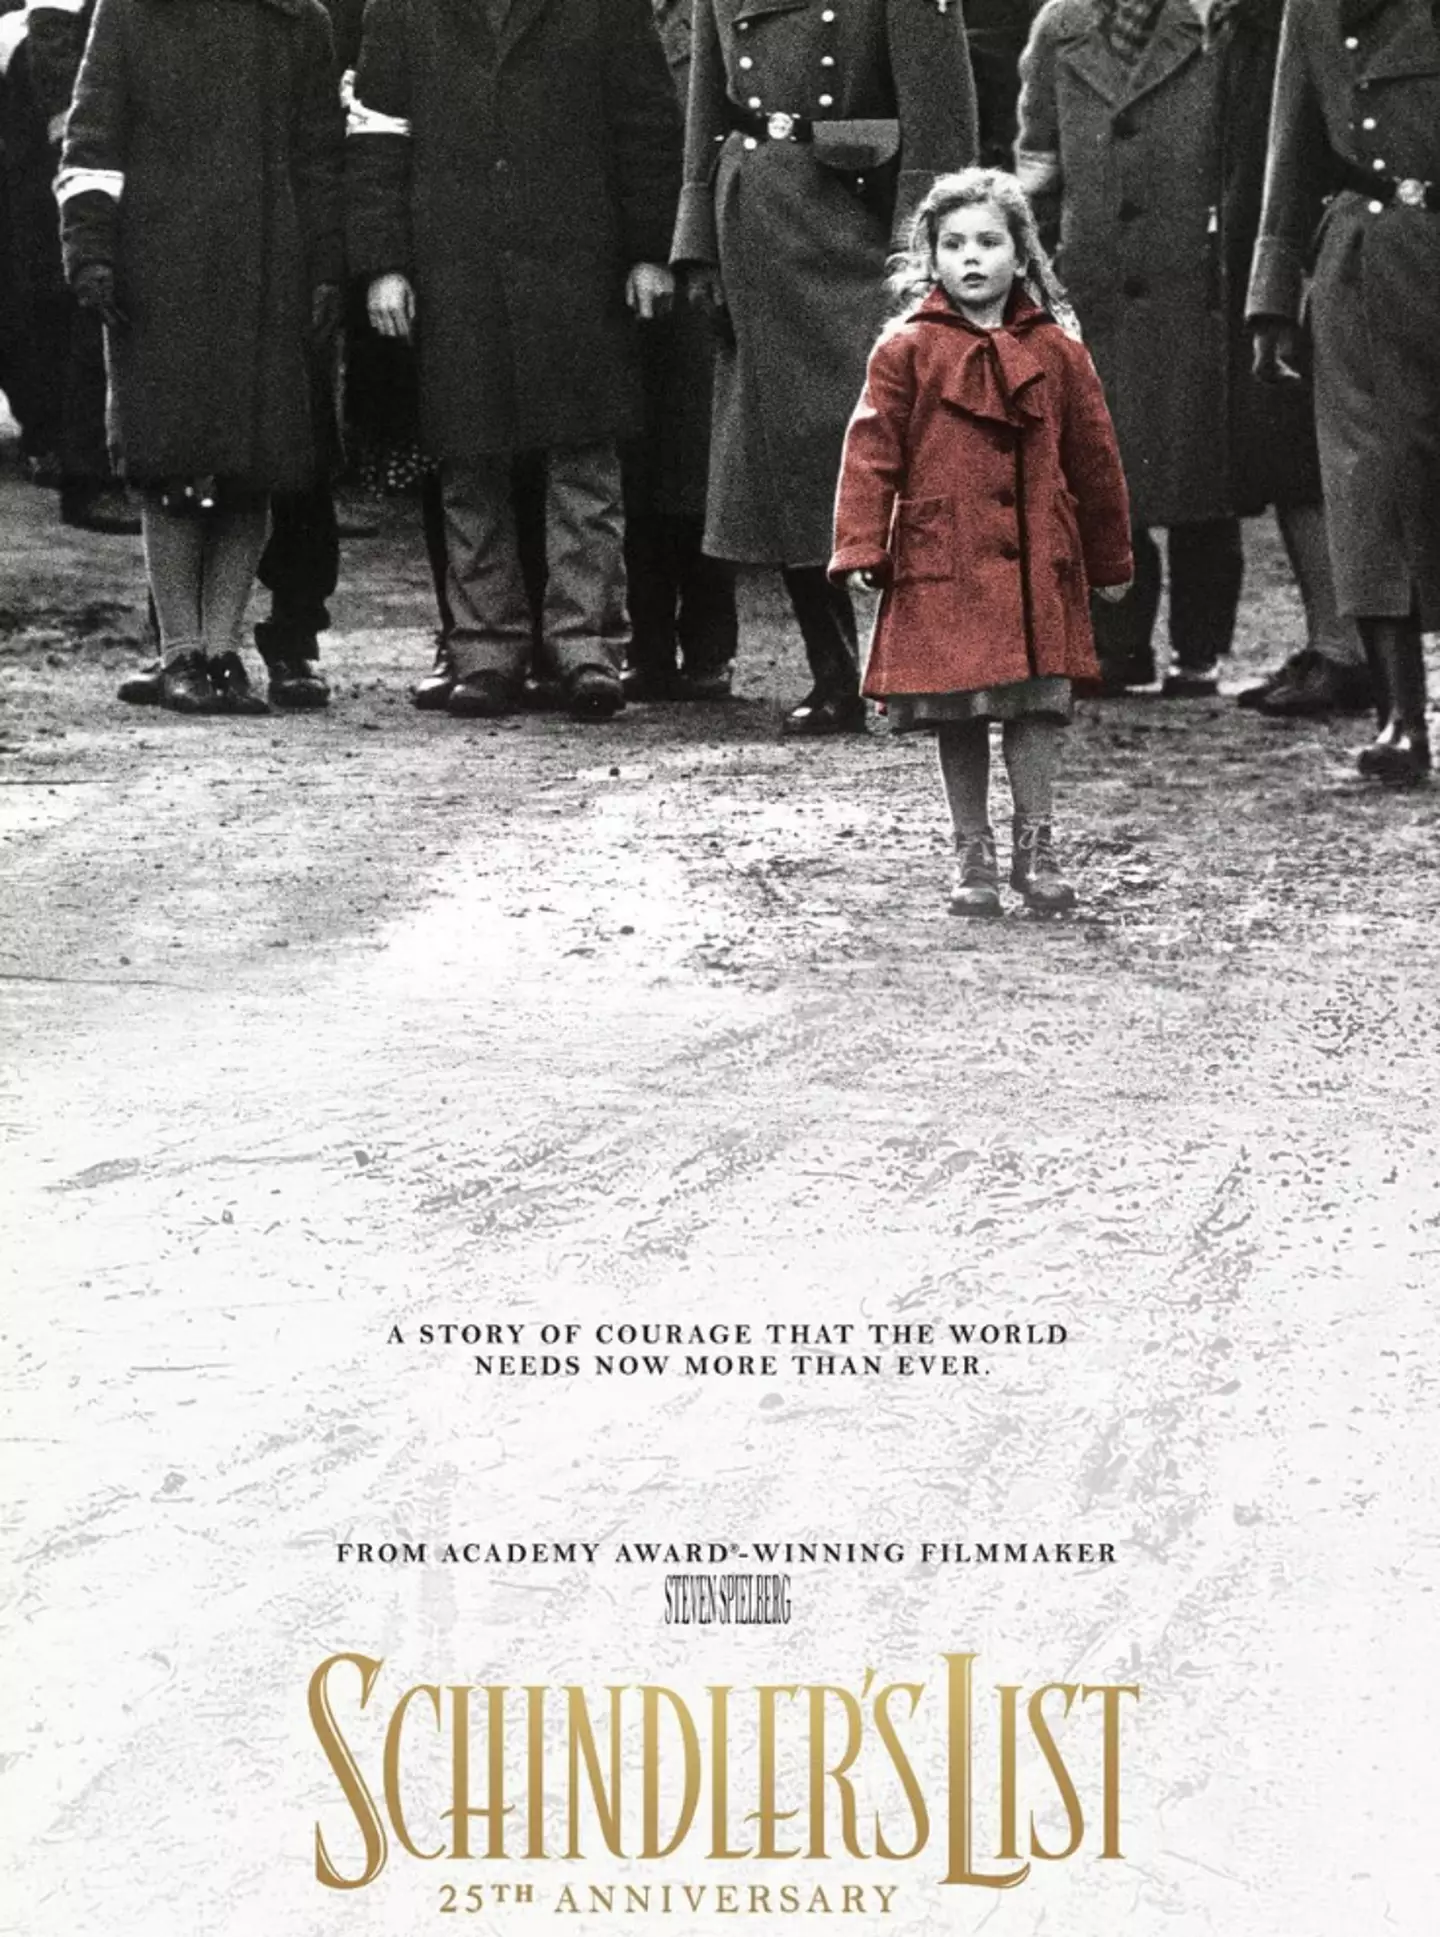 1993 biographical drama Schindlers List maintains a 98 percent Rotten Tomatoes